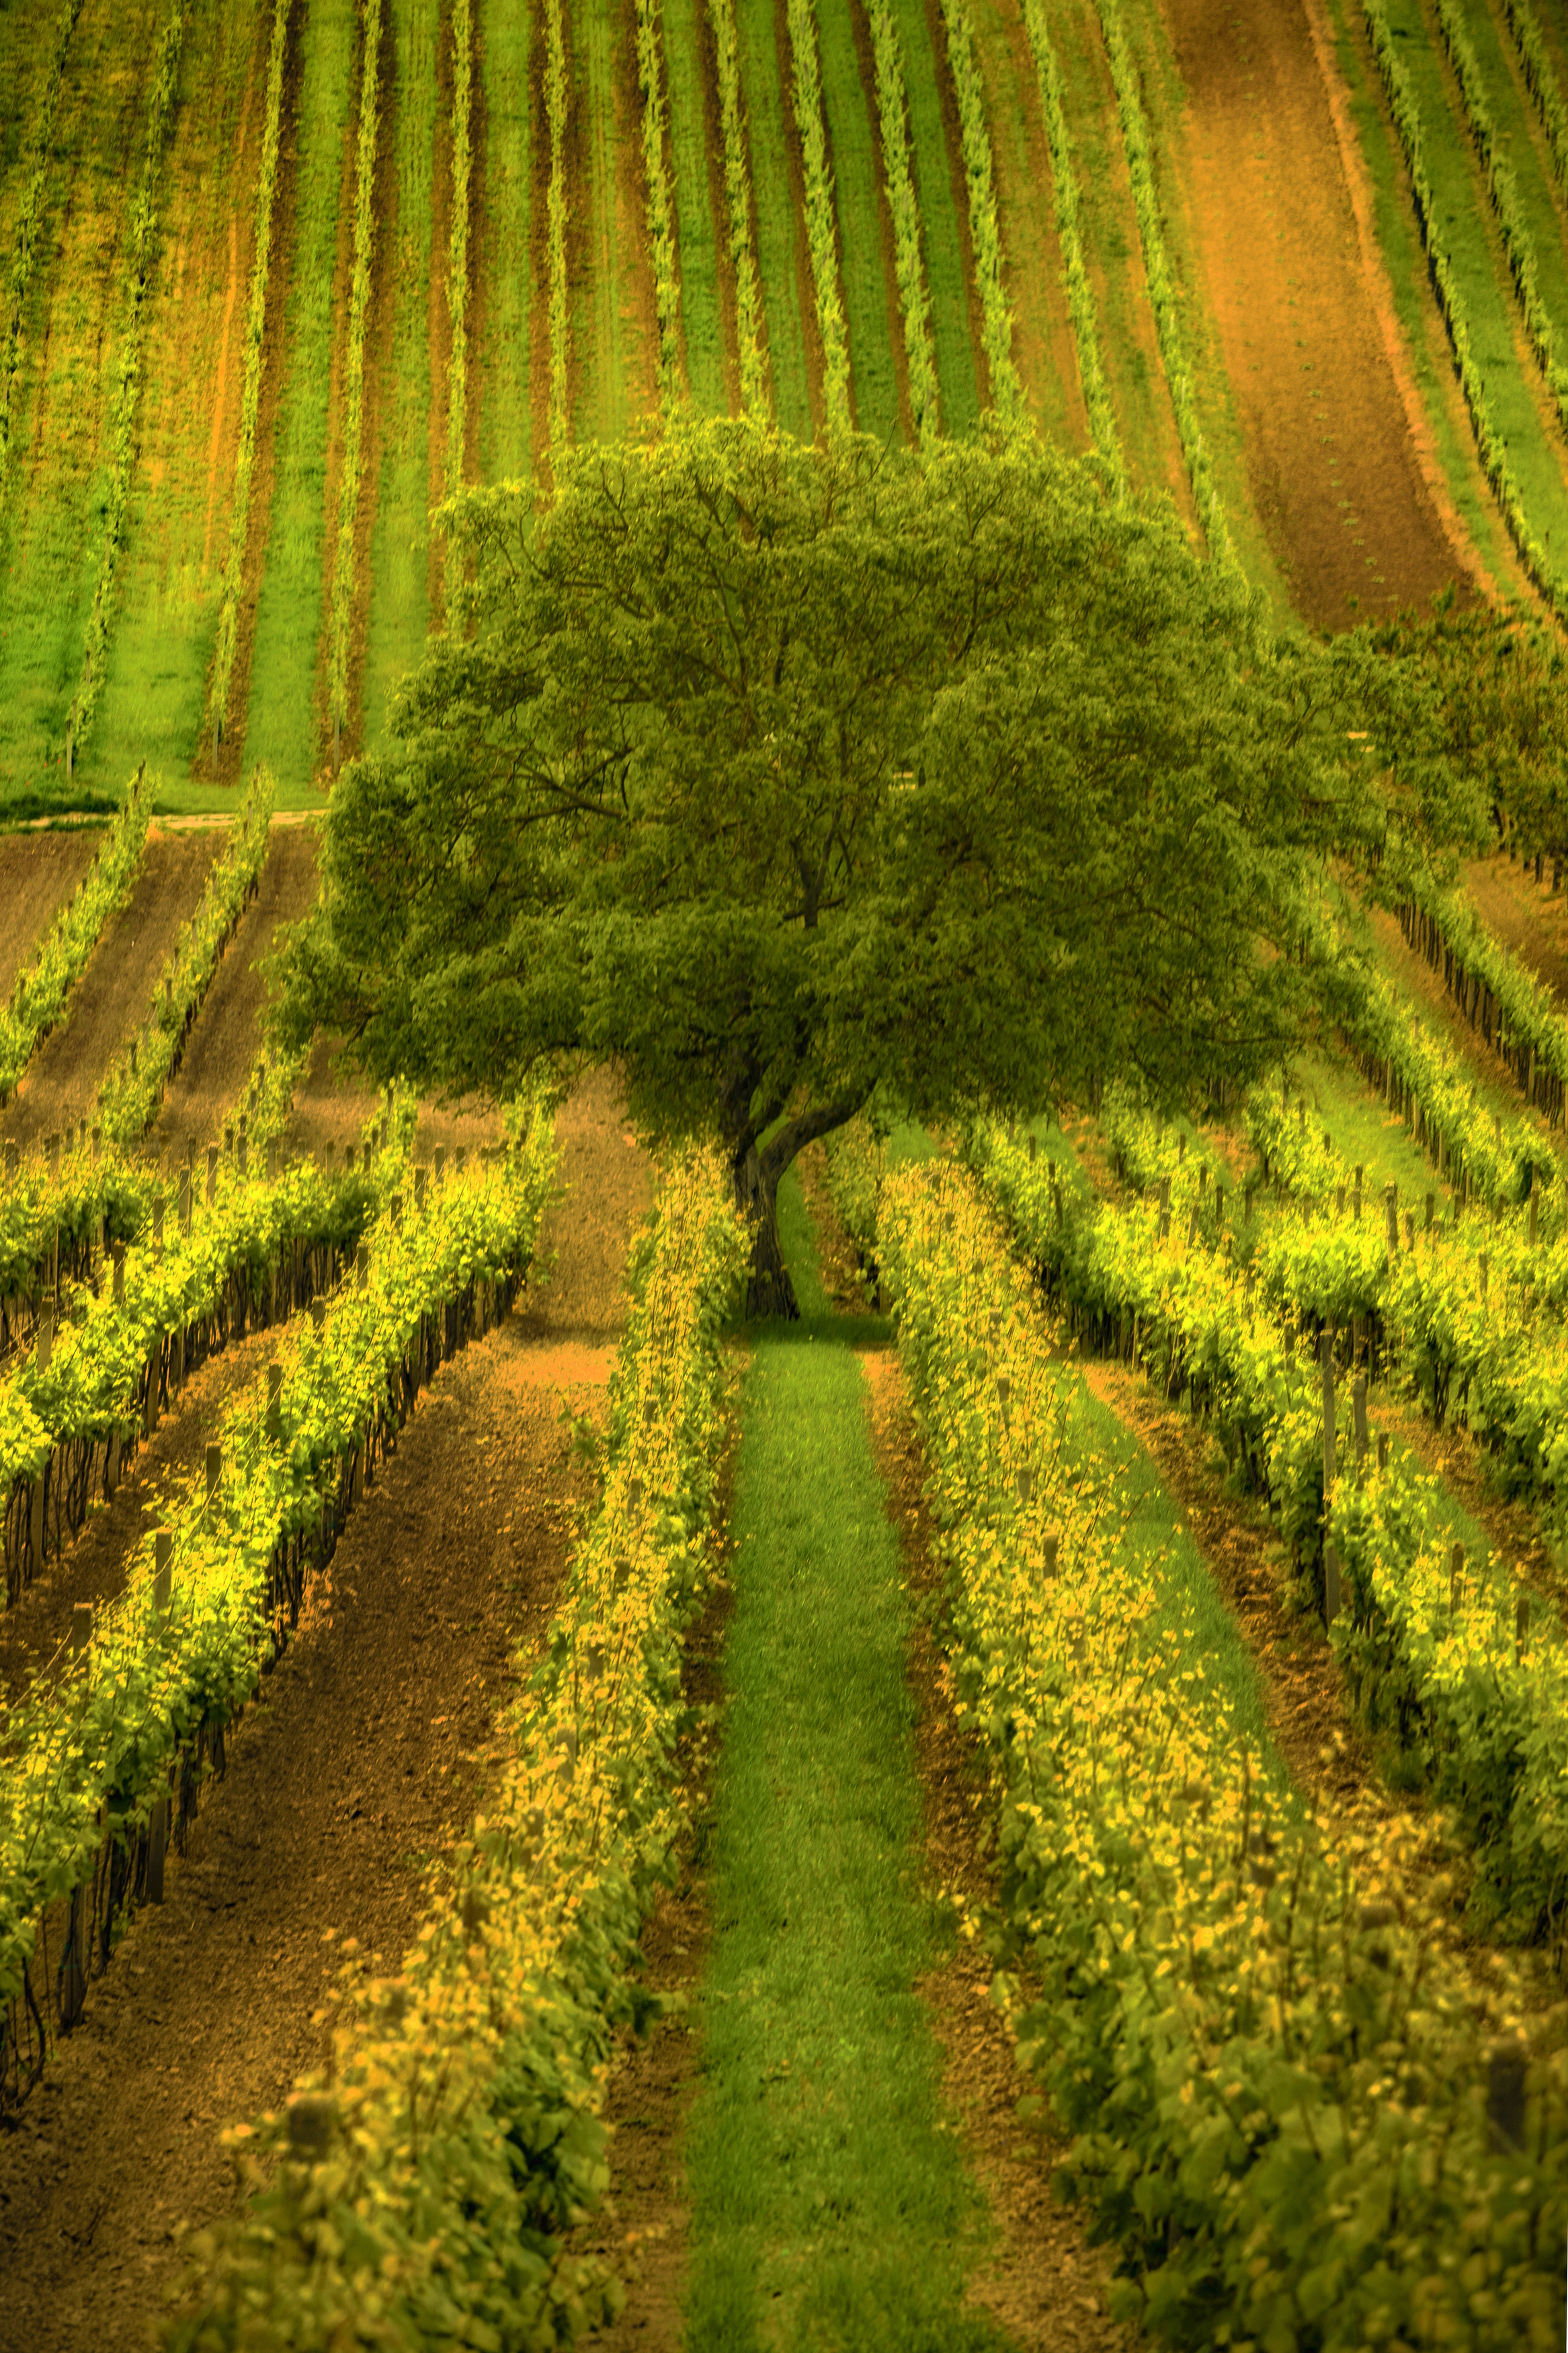 vertical, vineyard, moravia nature, agricultural, field, landscape, rural, tree, green-color, plant, hill, Damian Cyfka